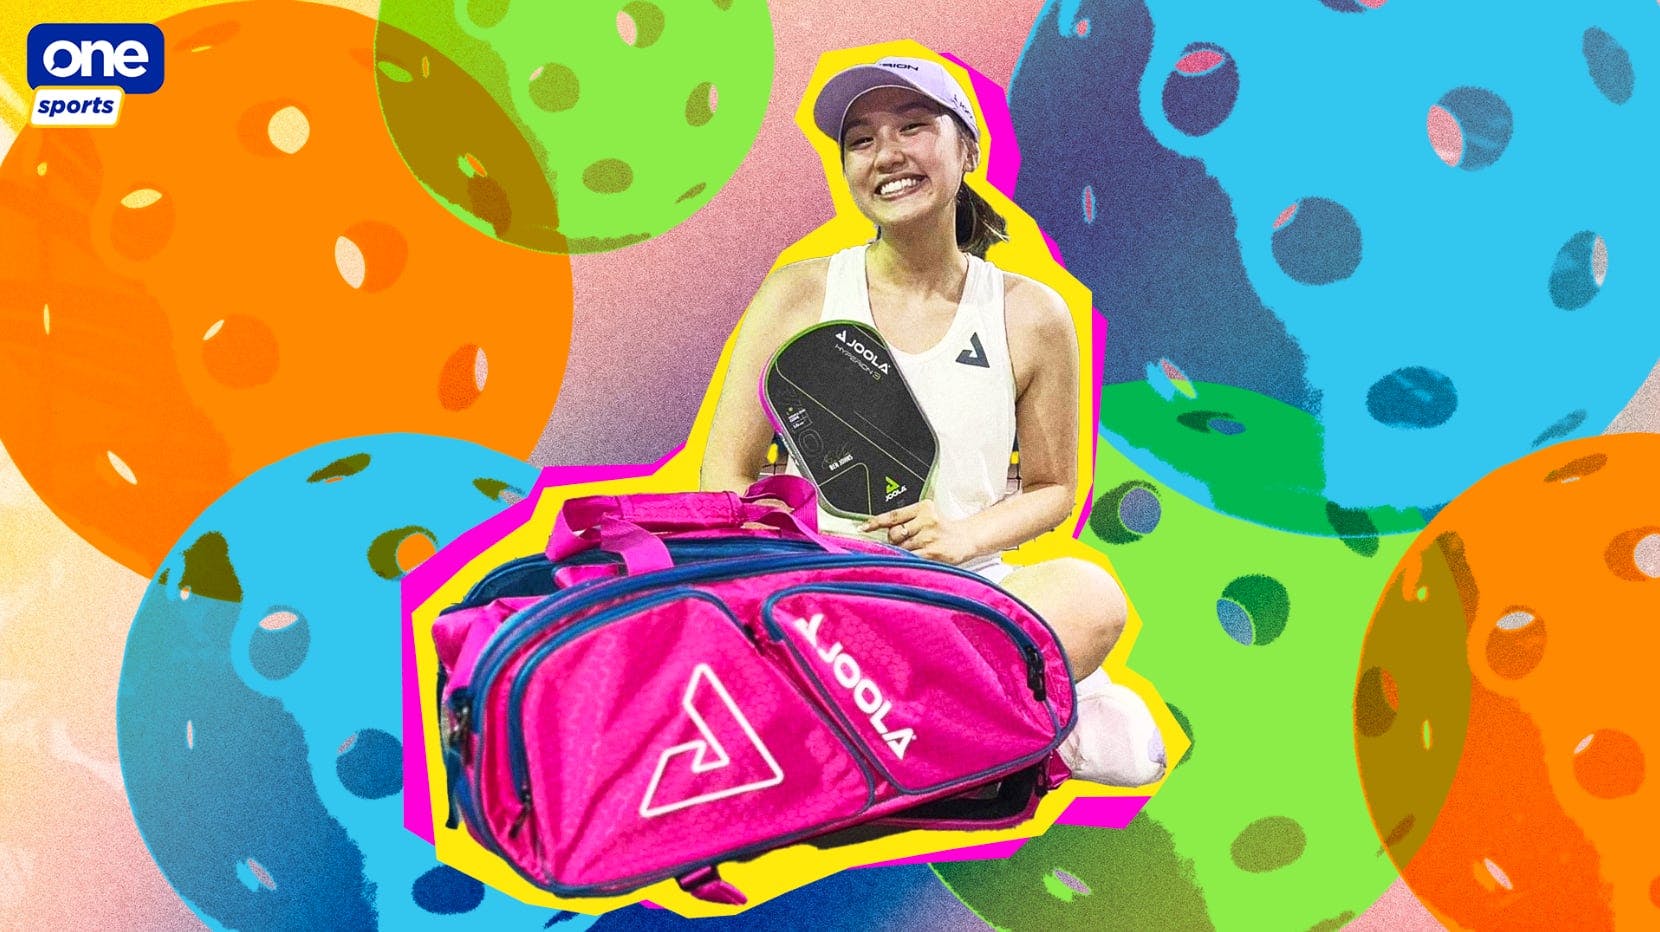 Sports in her blood: Mia Esteban hopes to carve a name for herself in pickleball